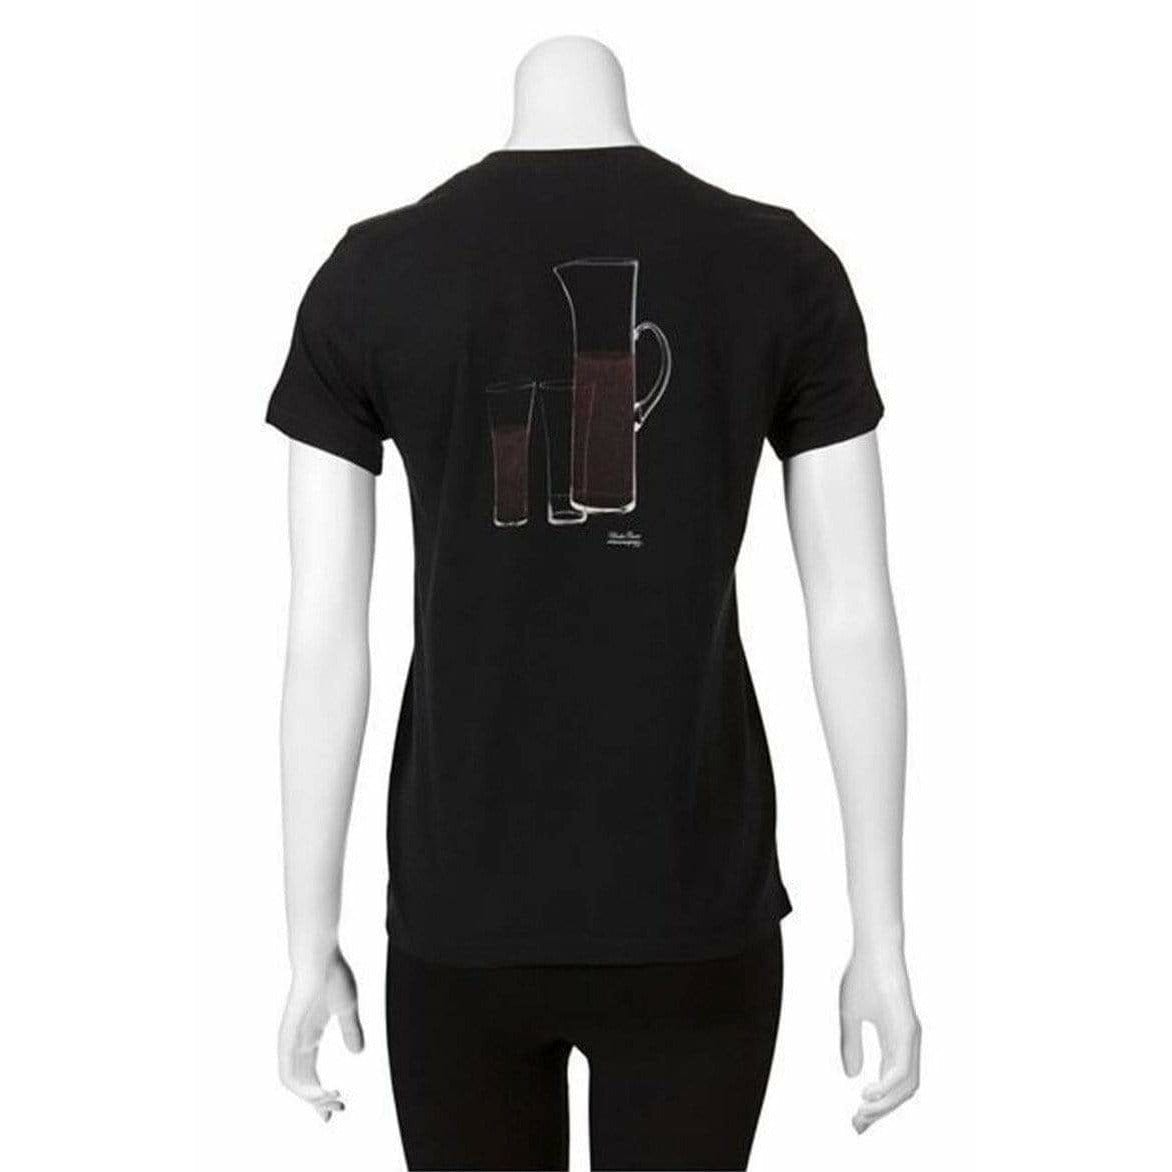 Undercover Shirts & Tops Undercover 'Kitted Drink' Black Cotton T-Shirt